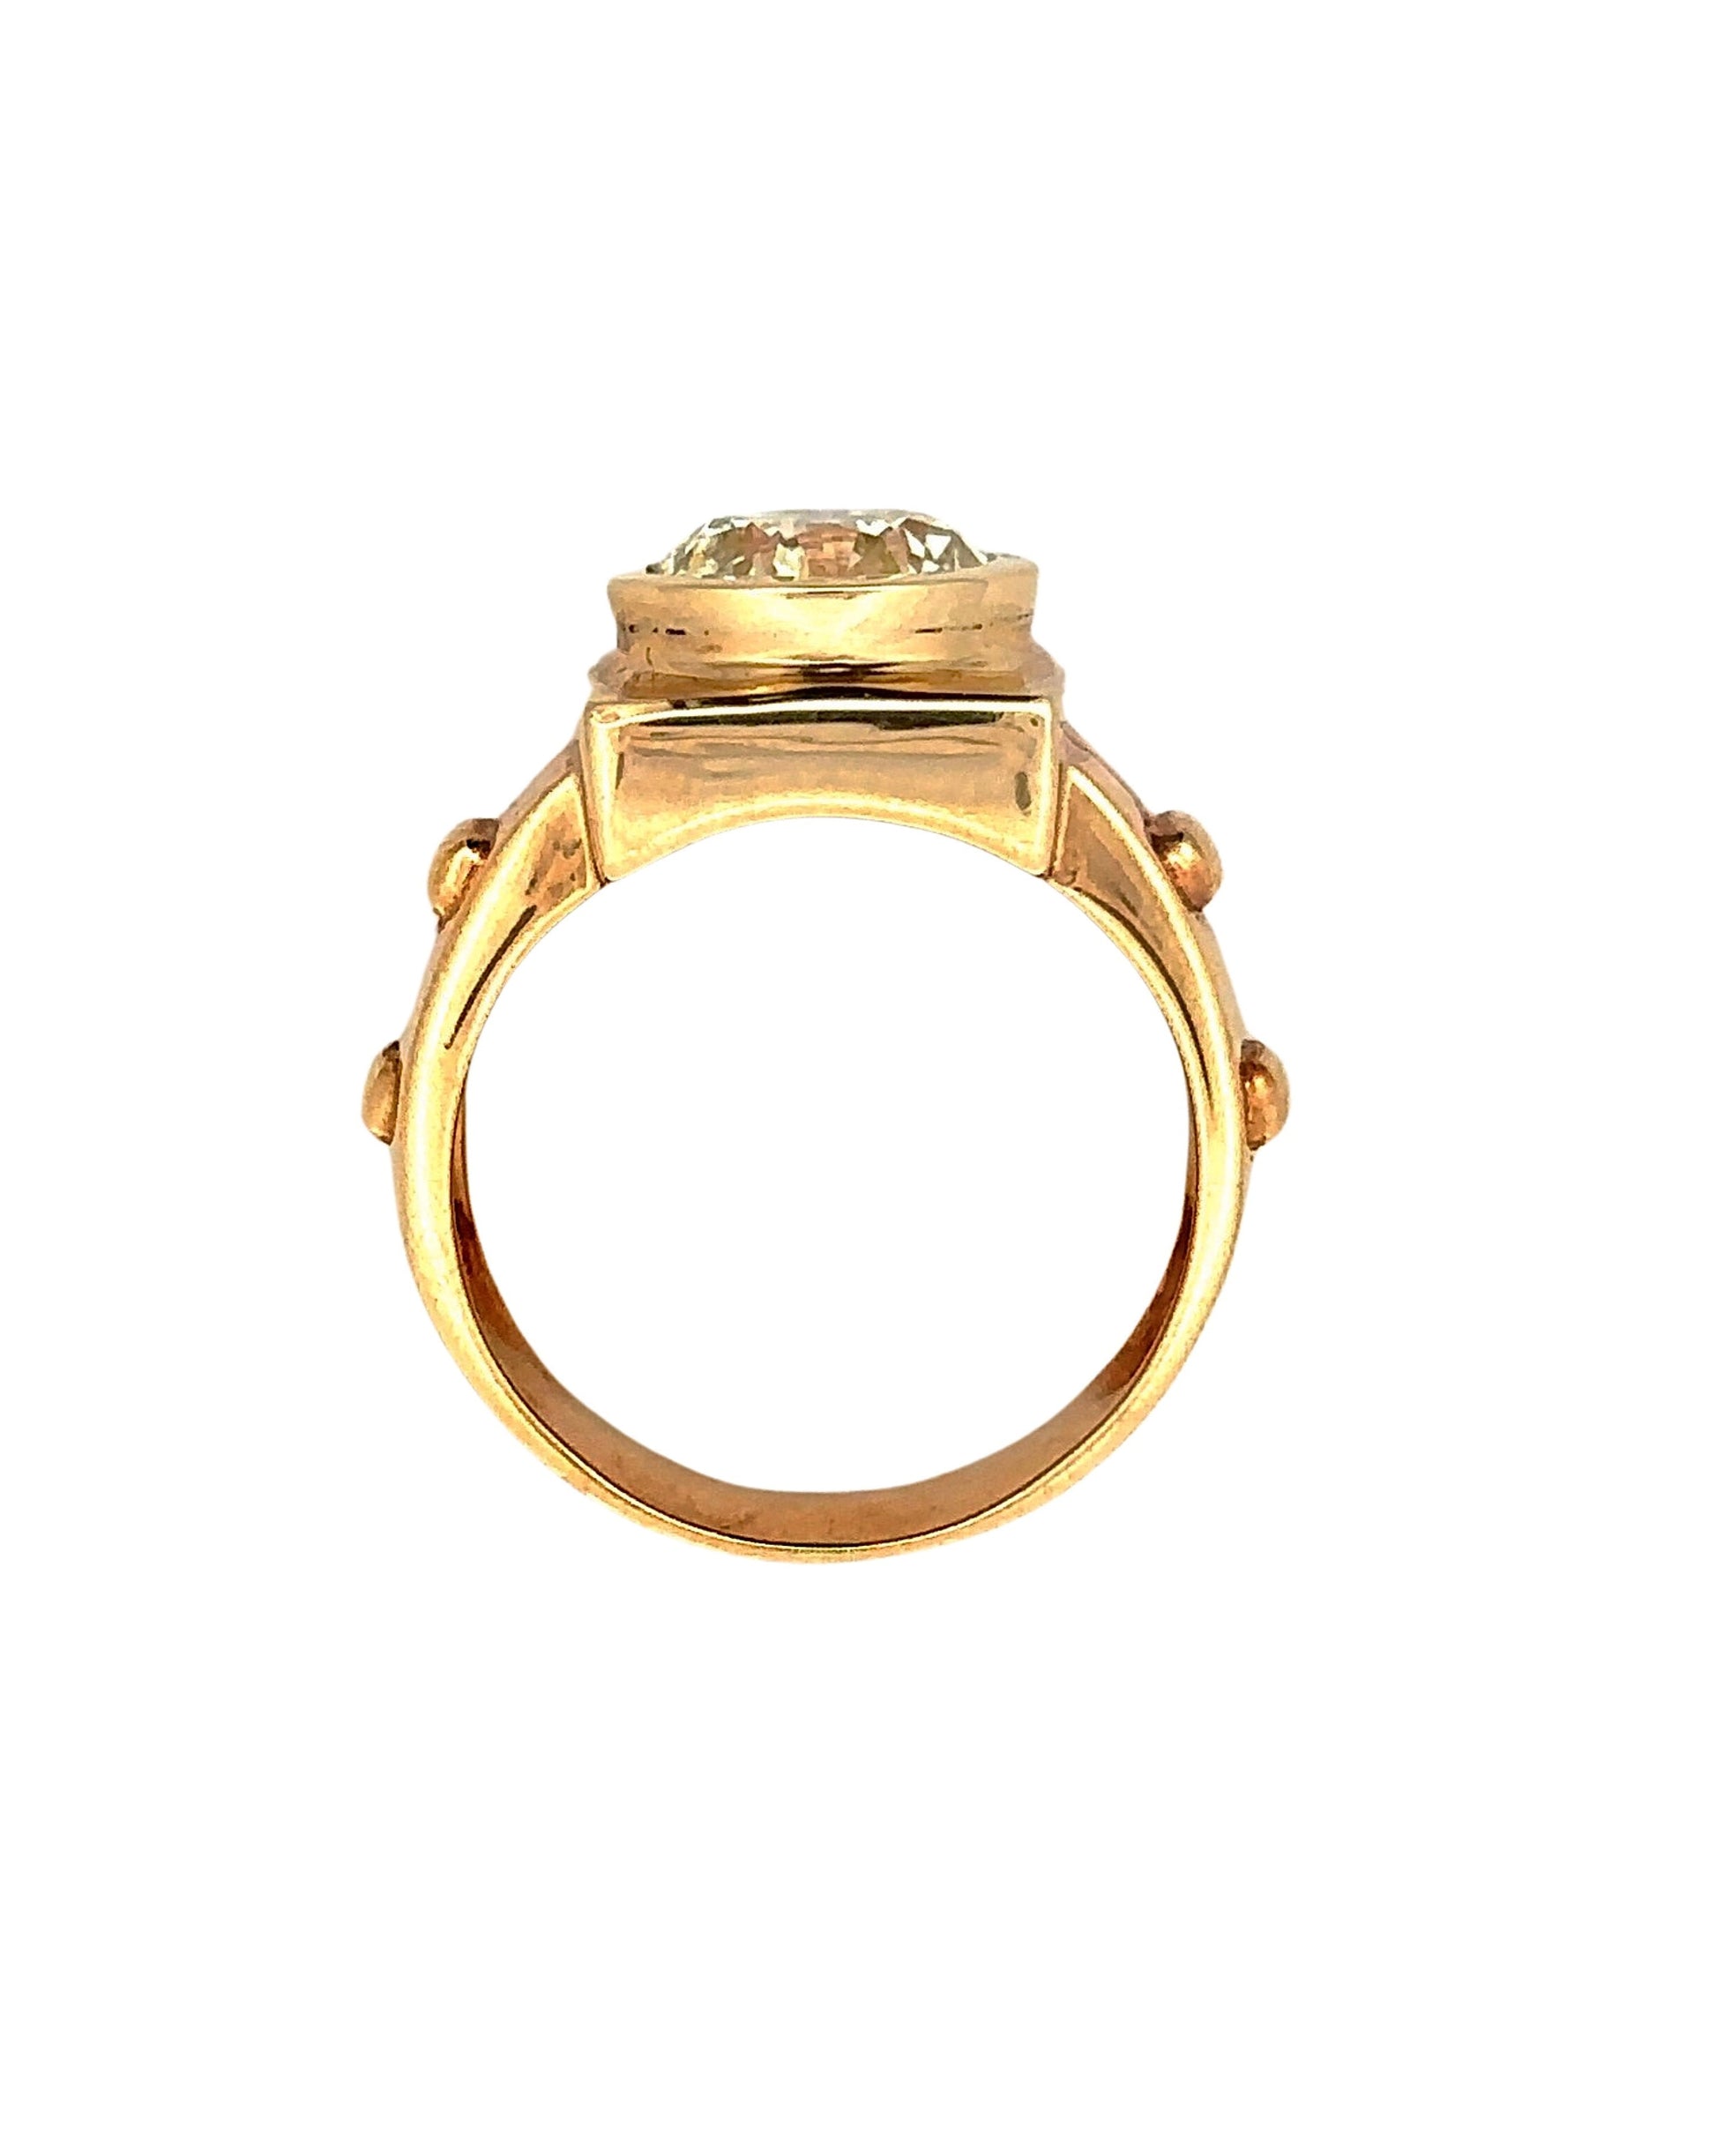 top of yellow gold ring with scratches on gold